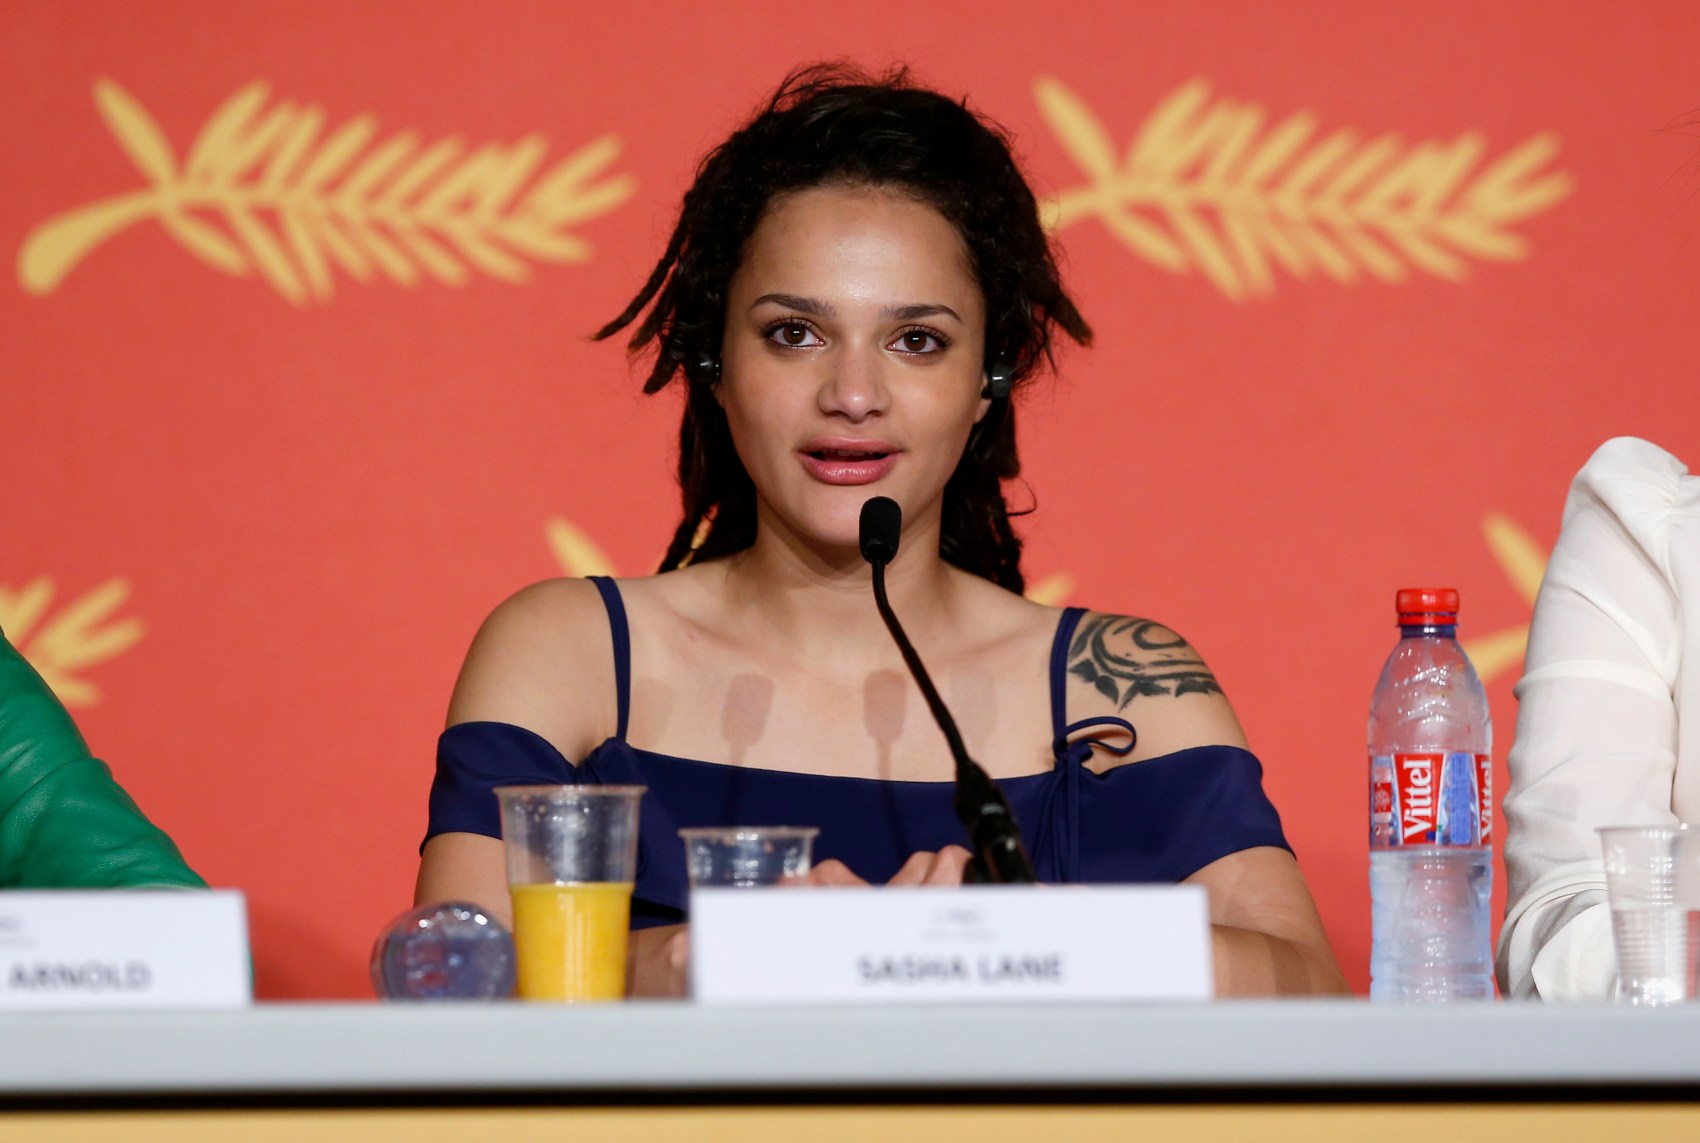 "American Honey" Press Conference - The 69th Annual Cannes Film Festival